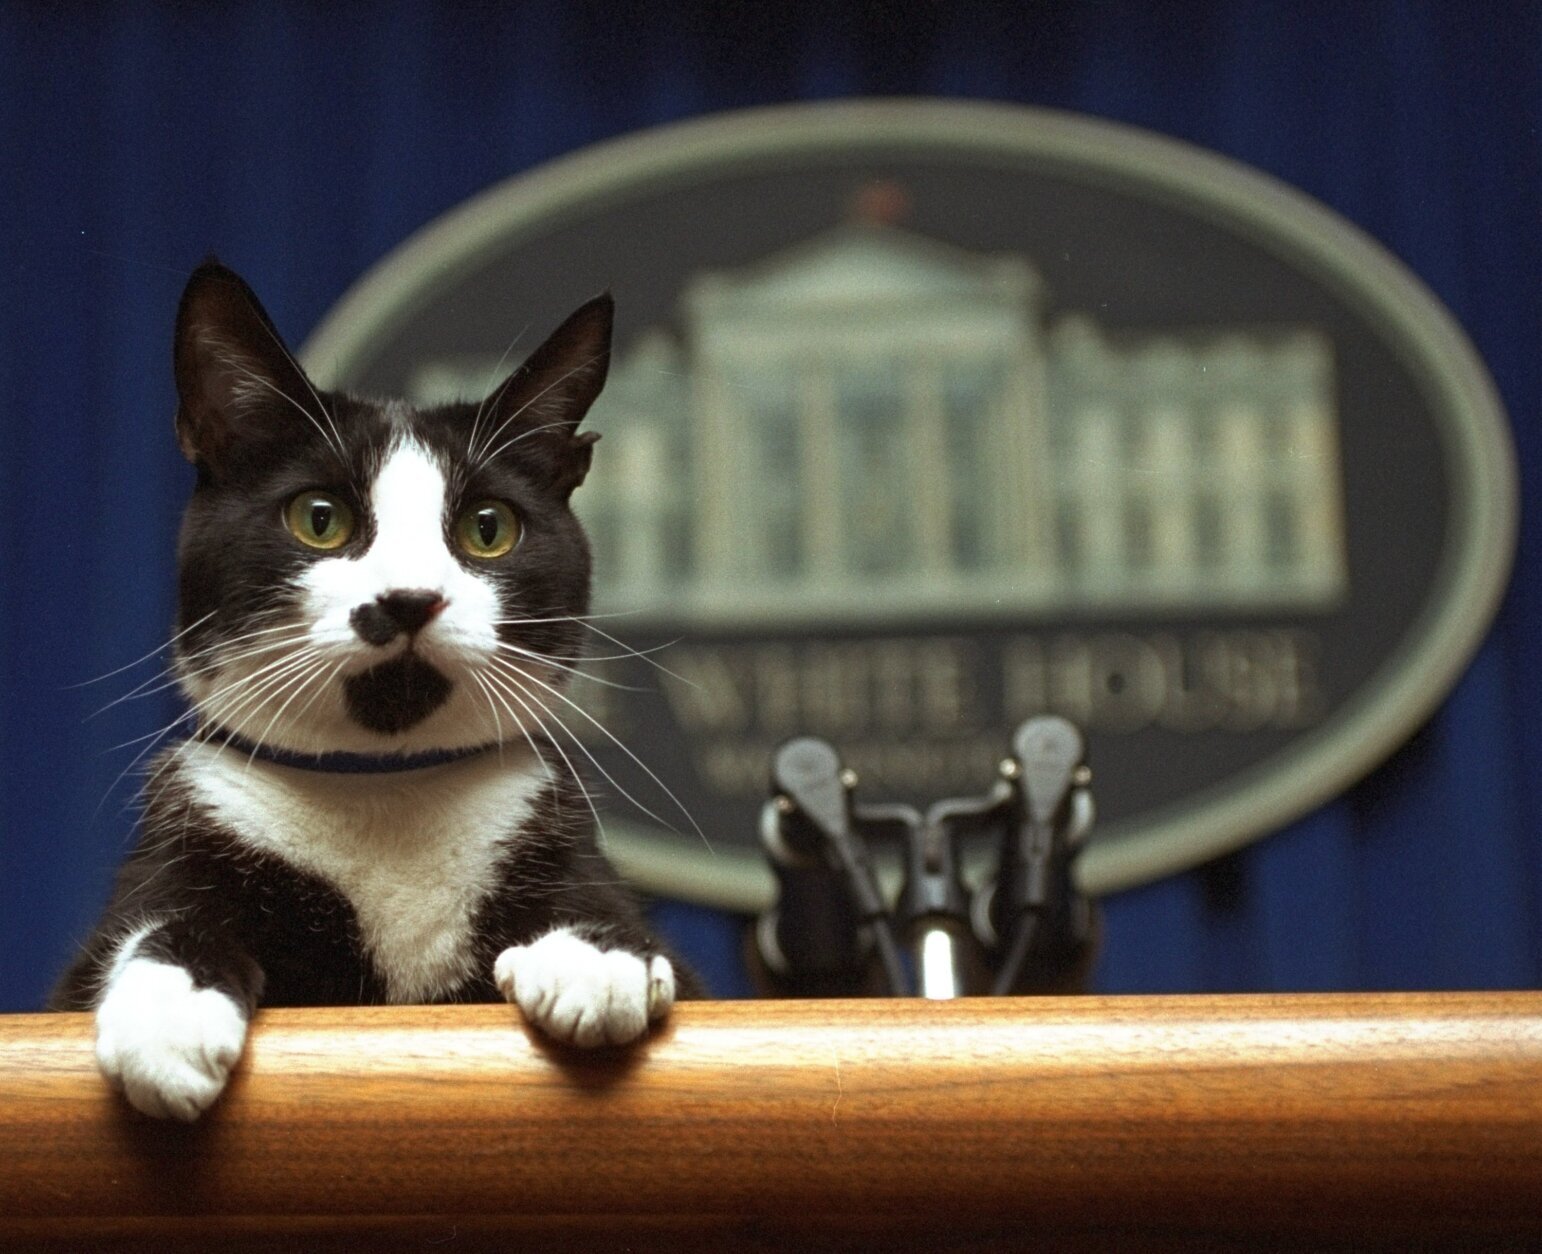 Willow Biden joins long and varied line of White House pets - WTOP News